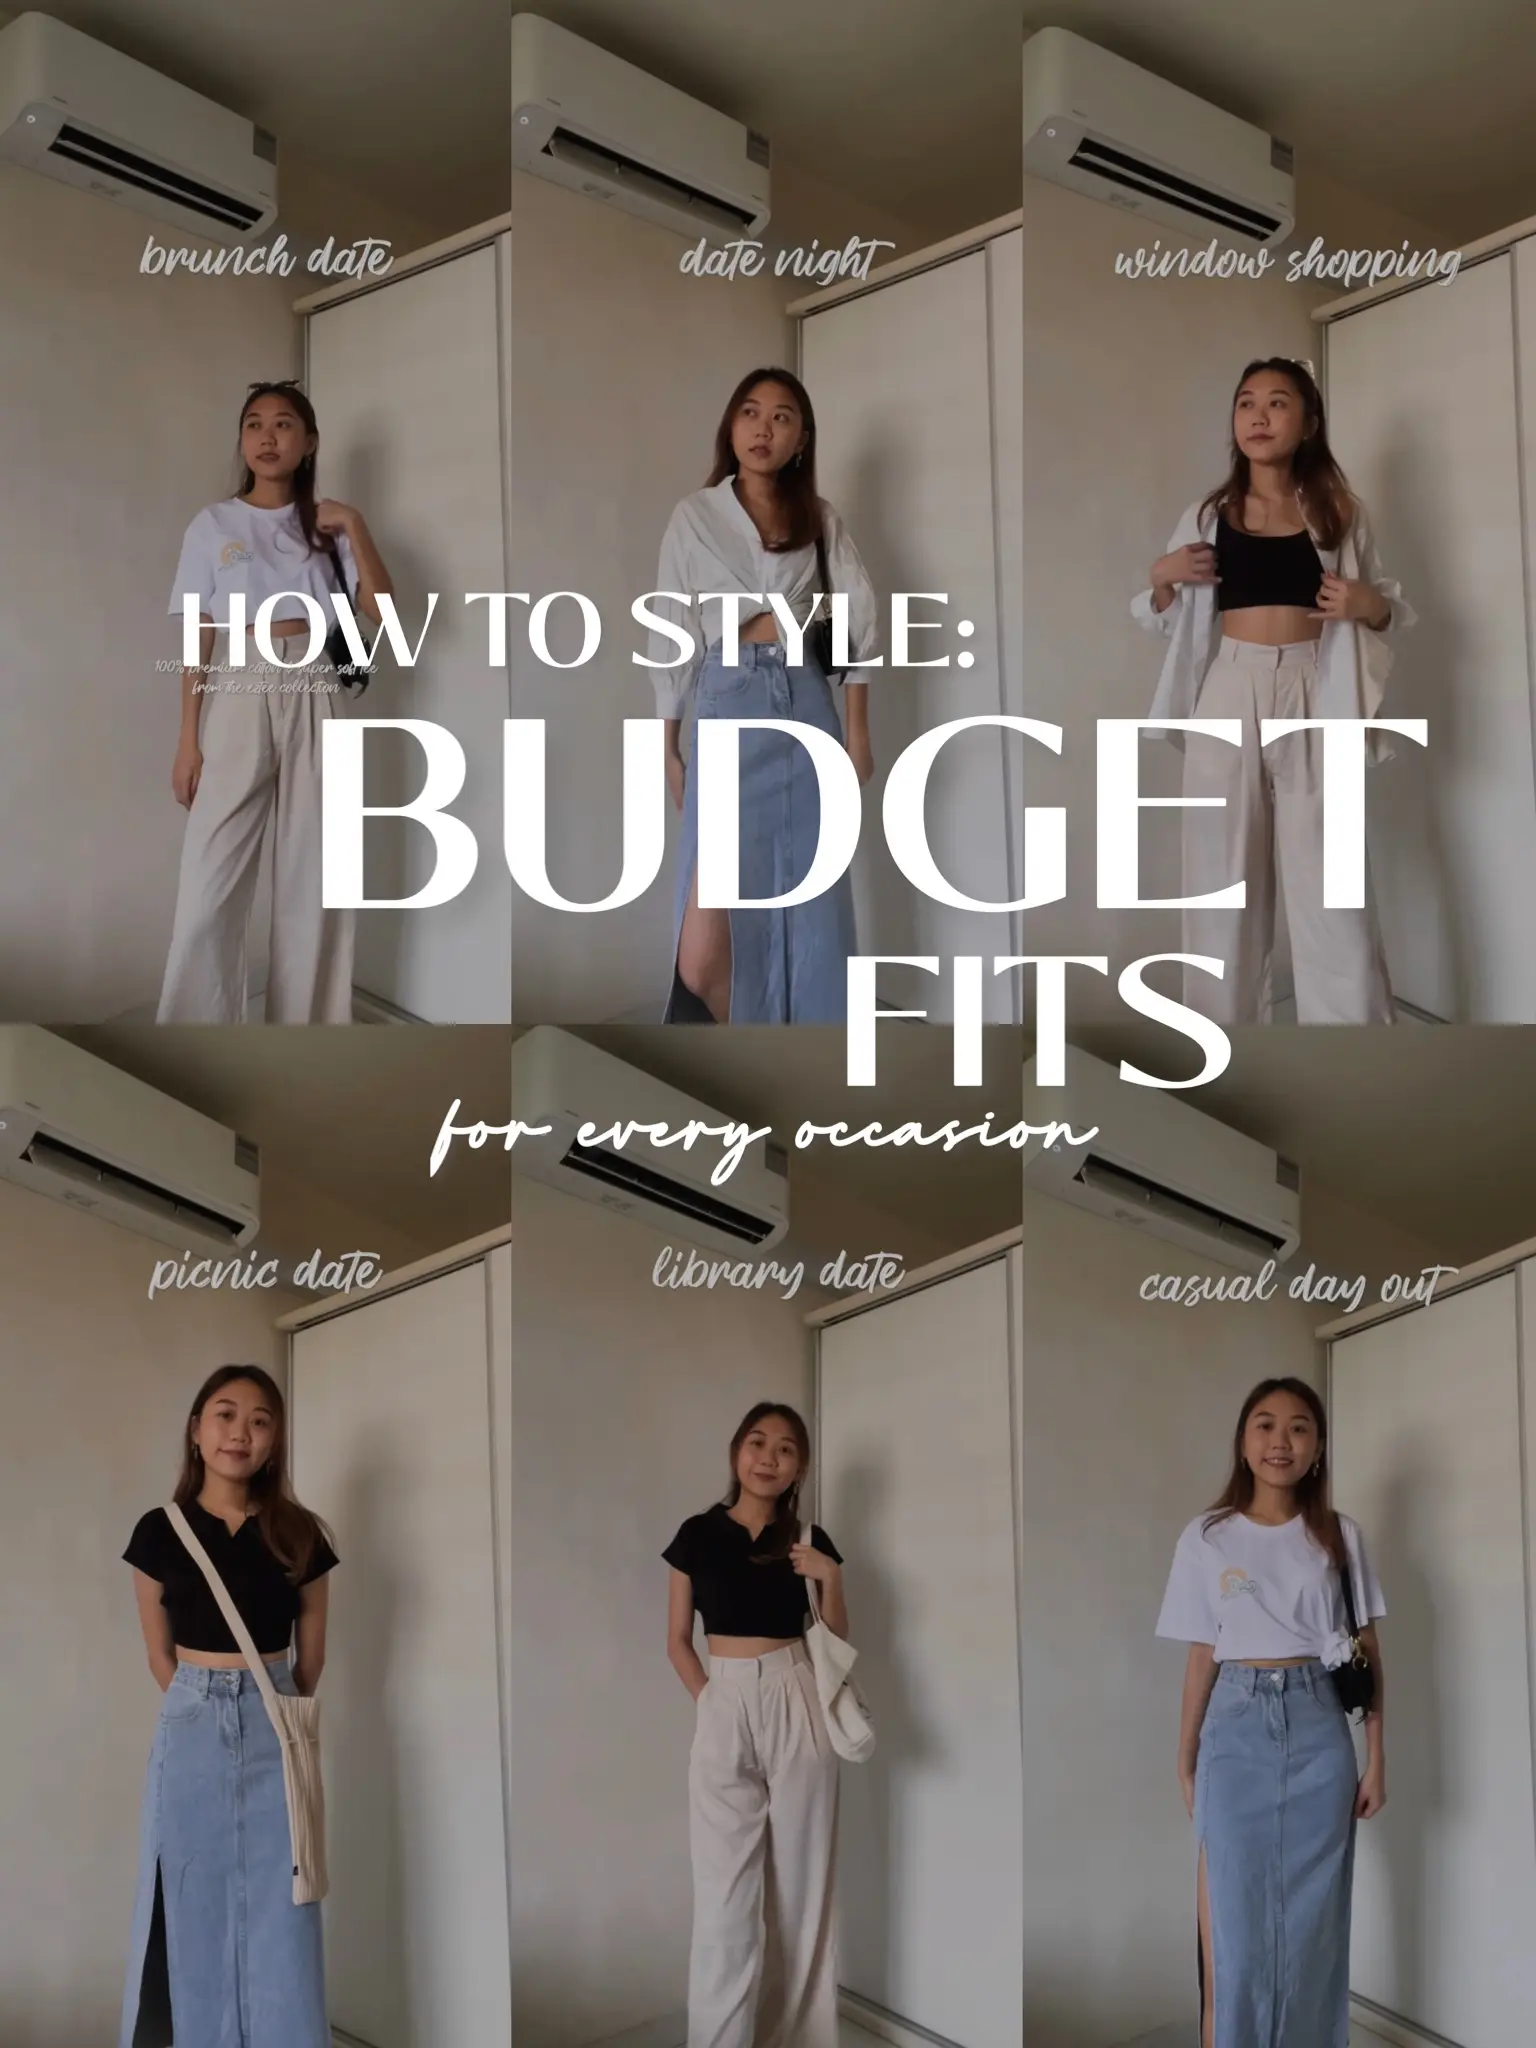 How to build the “Matilda Djerf summer aesthetic” on a budget and